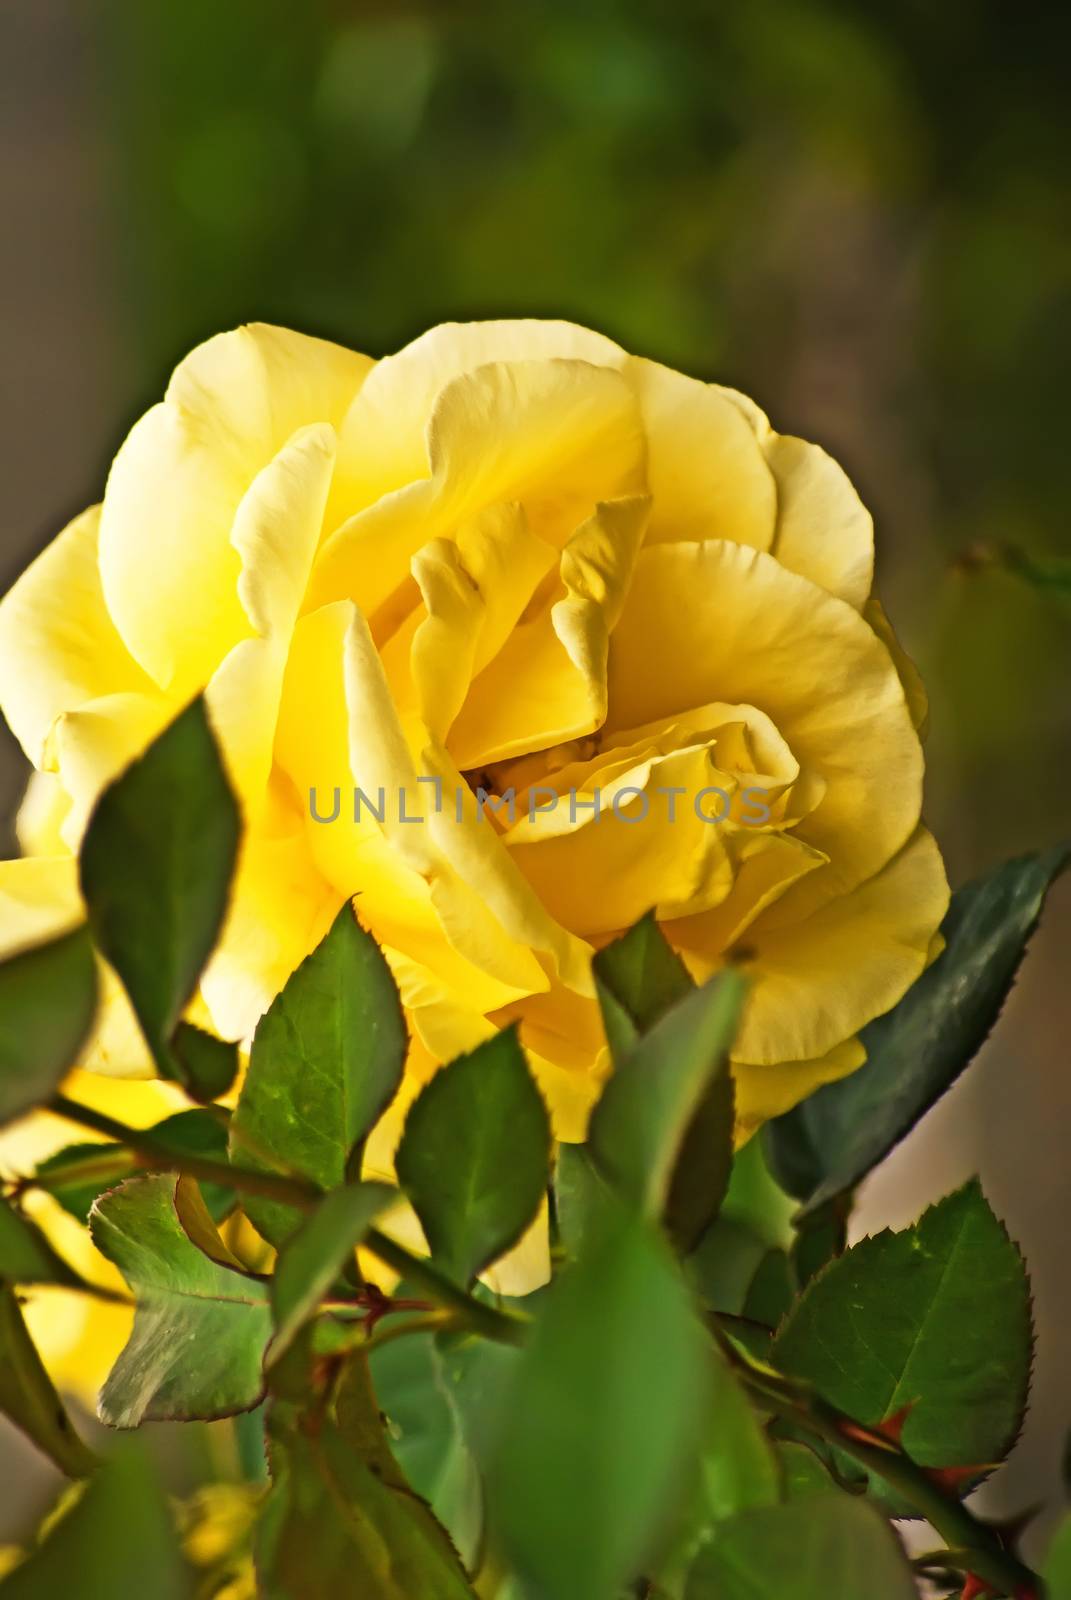 Live yellow rose flower among leaves and thorns in the garder.